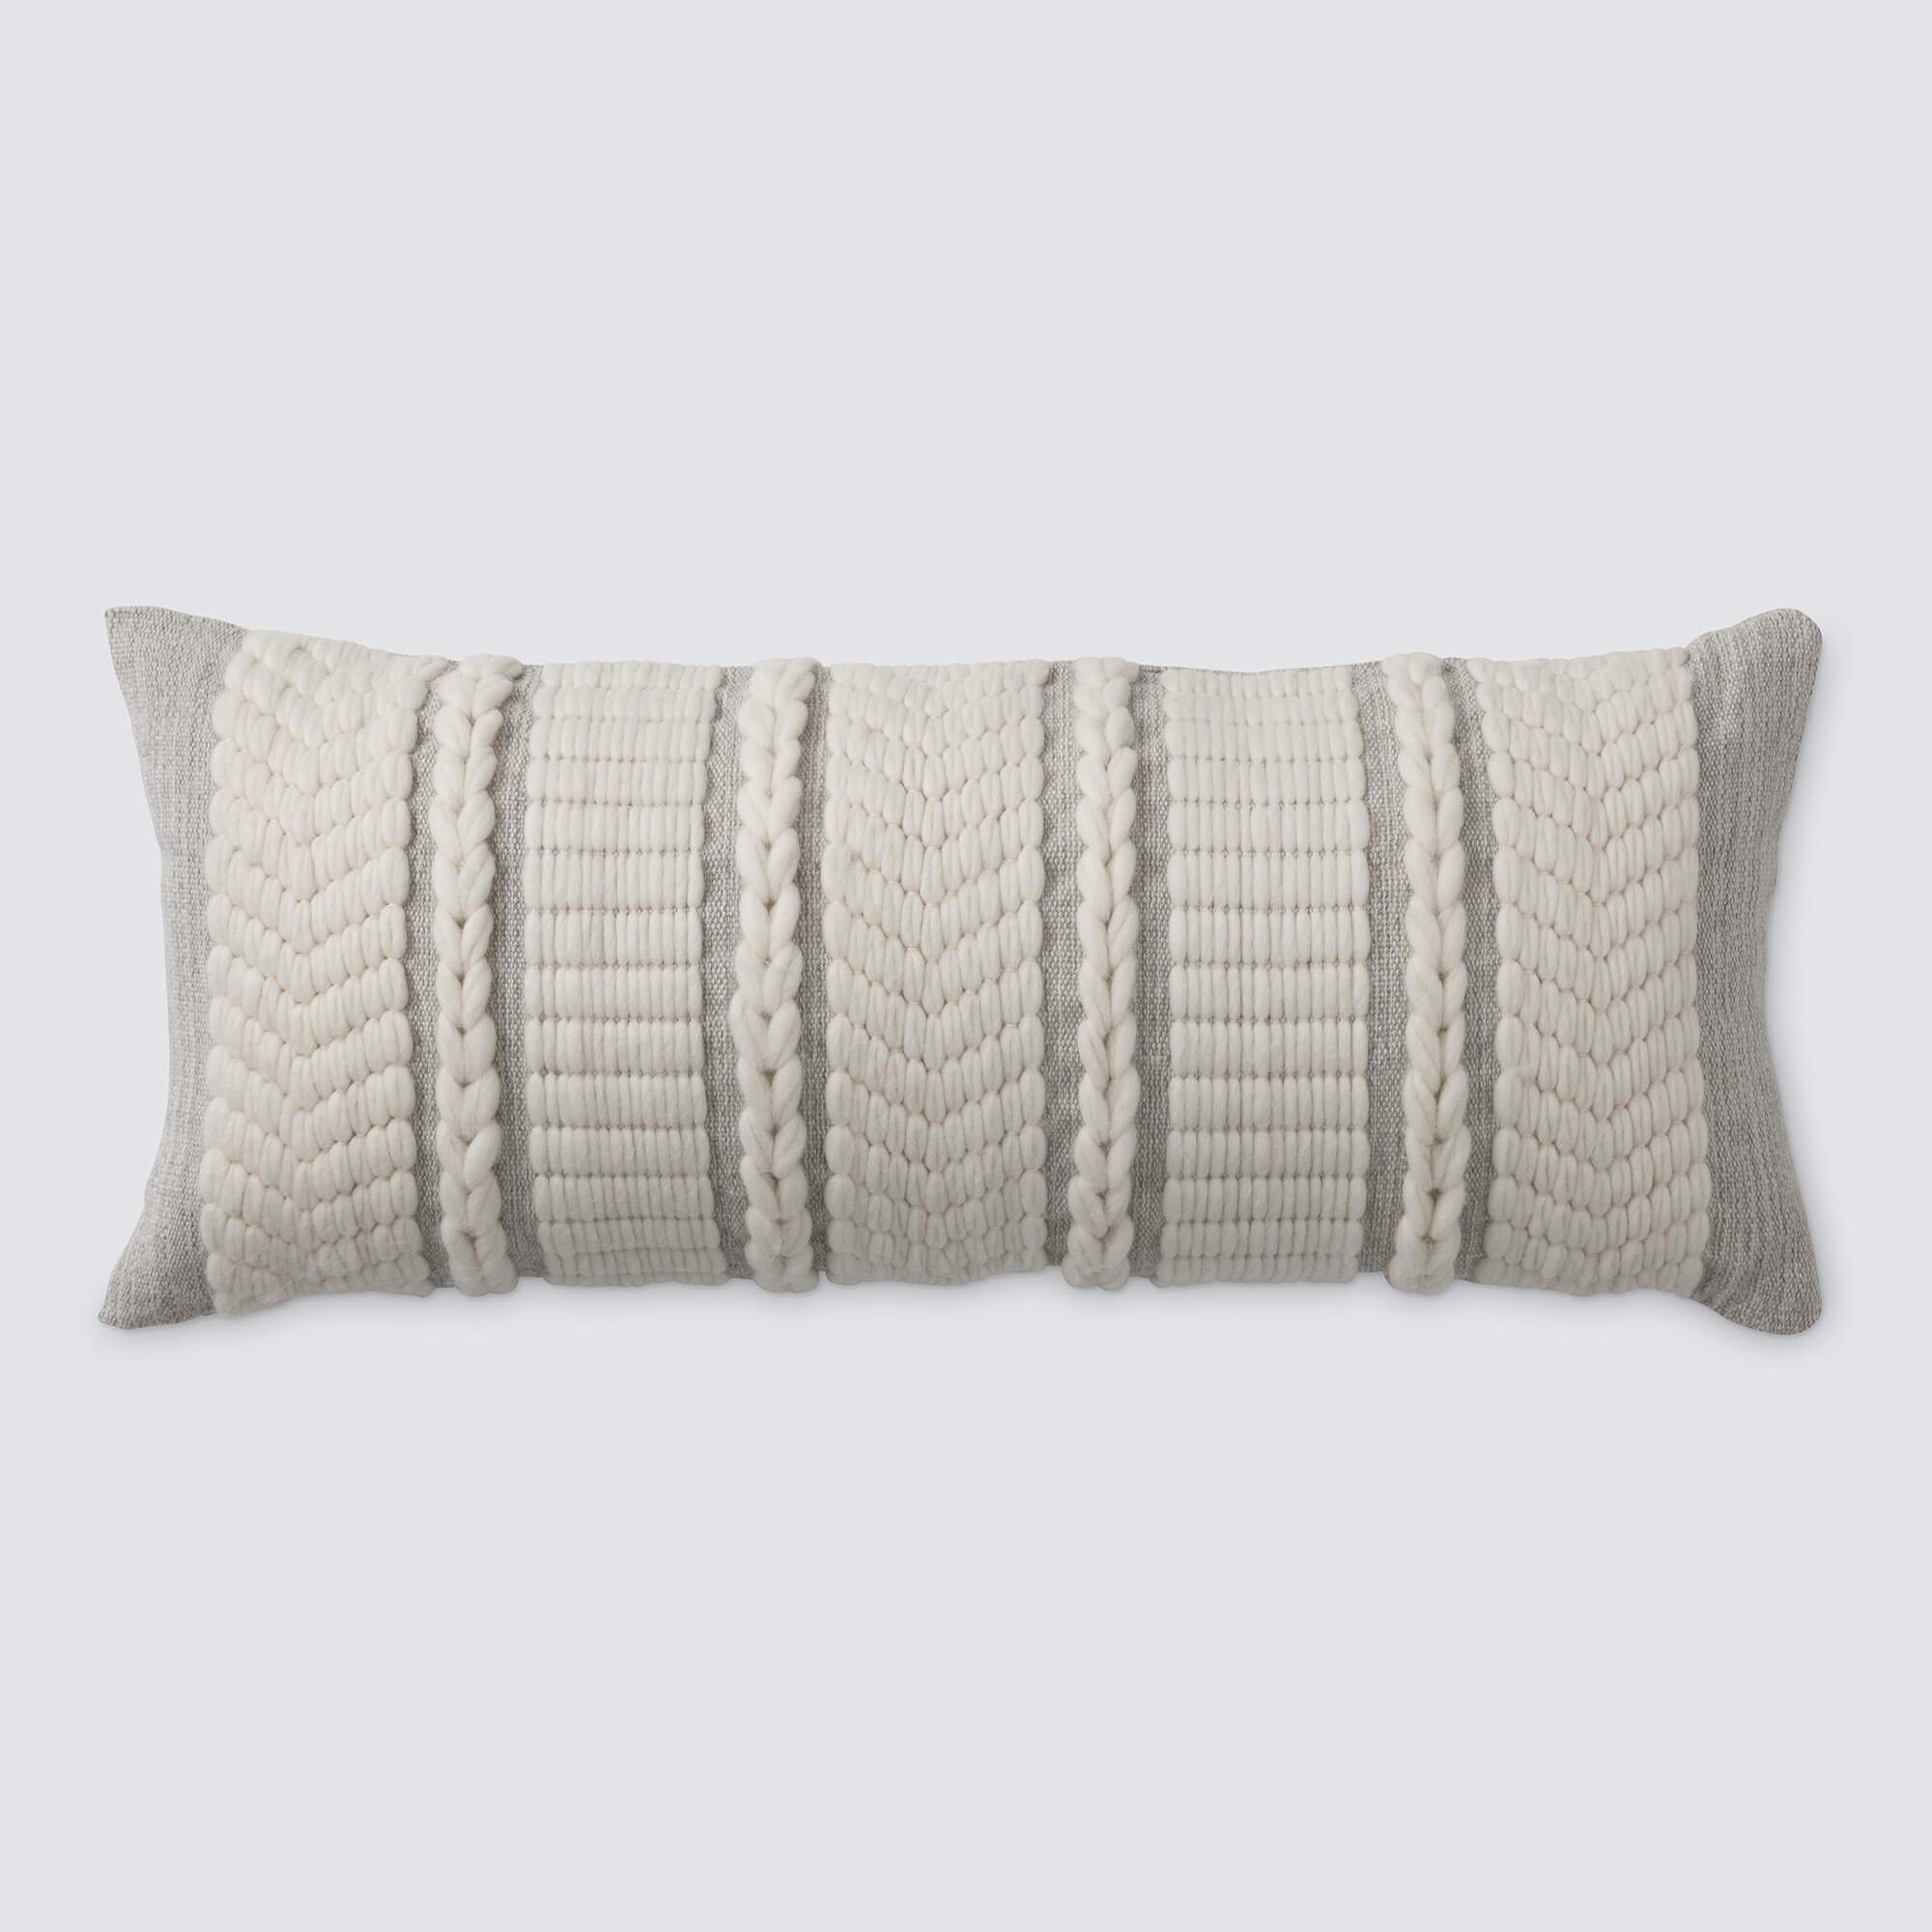 Invierno Lumbar Pillow By The Citizenry - Image 0